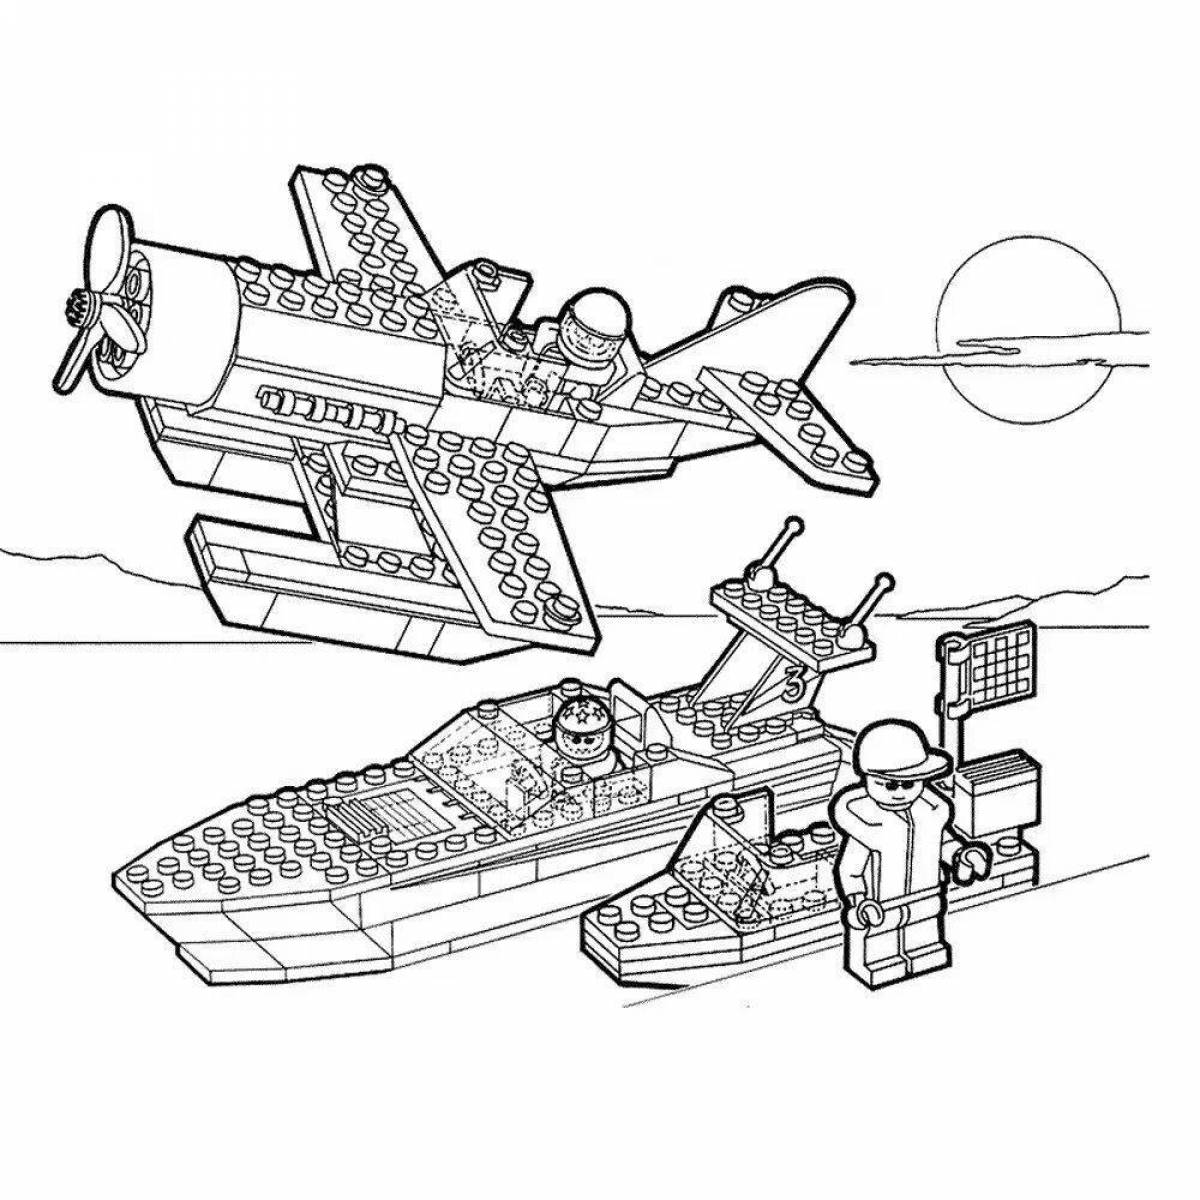 Fairy minecraft ship coloring page